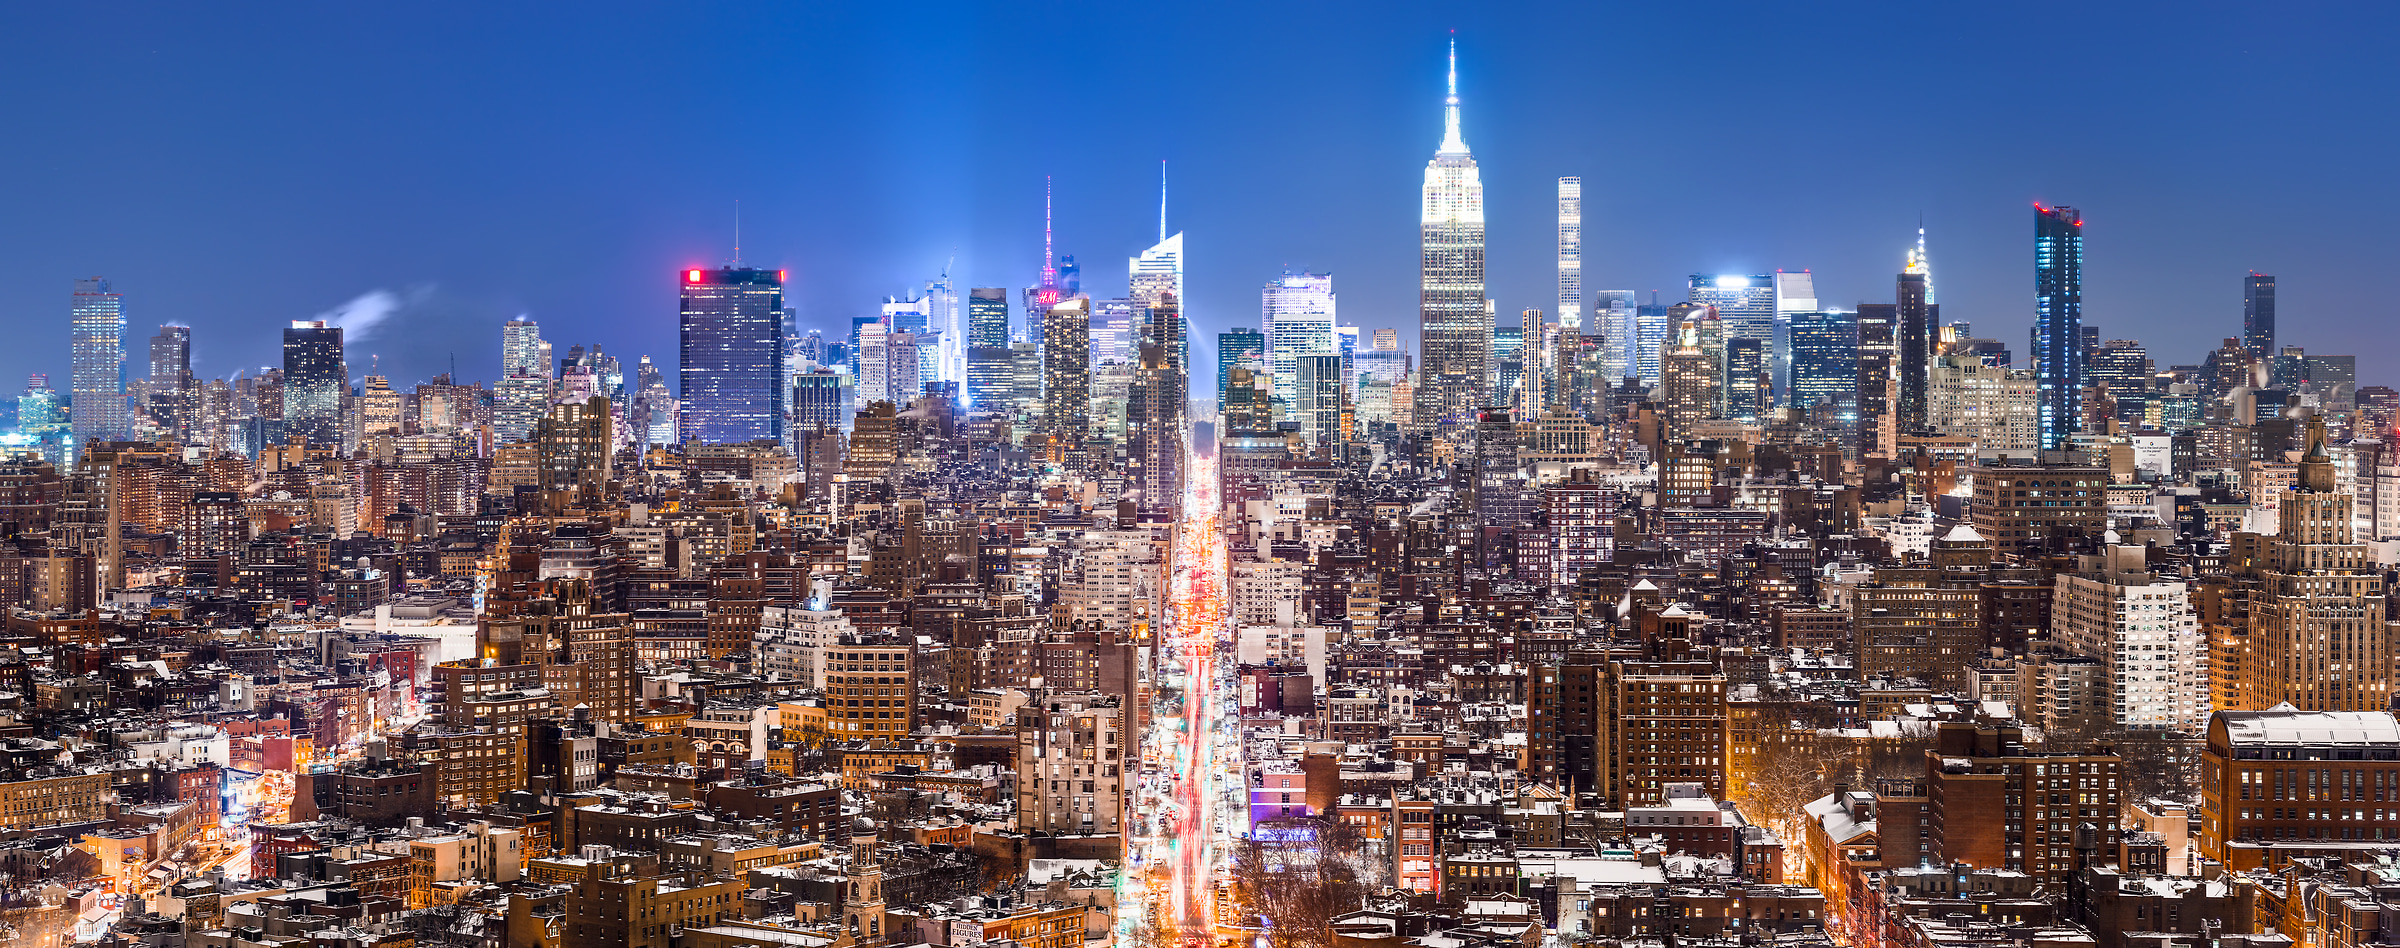 2,002 megapixels! A very high resolution, large-format VAST photo print of the NYC skyline in winter snow at night; cityscape fine art photo created by Dan Piech in New York City